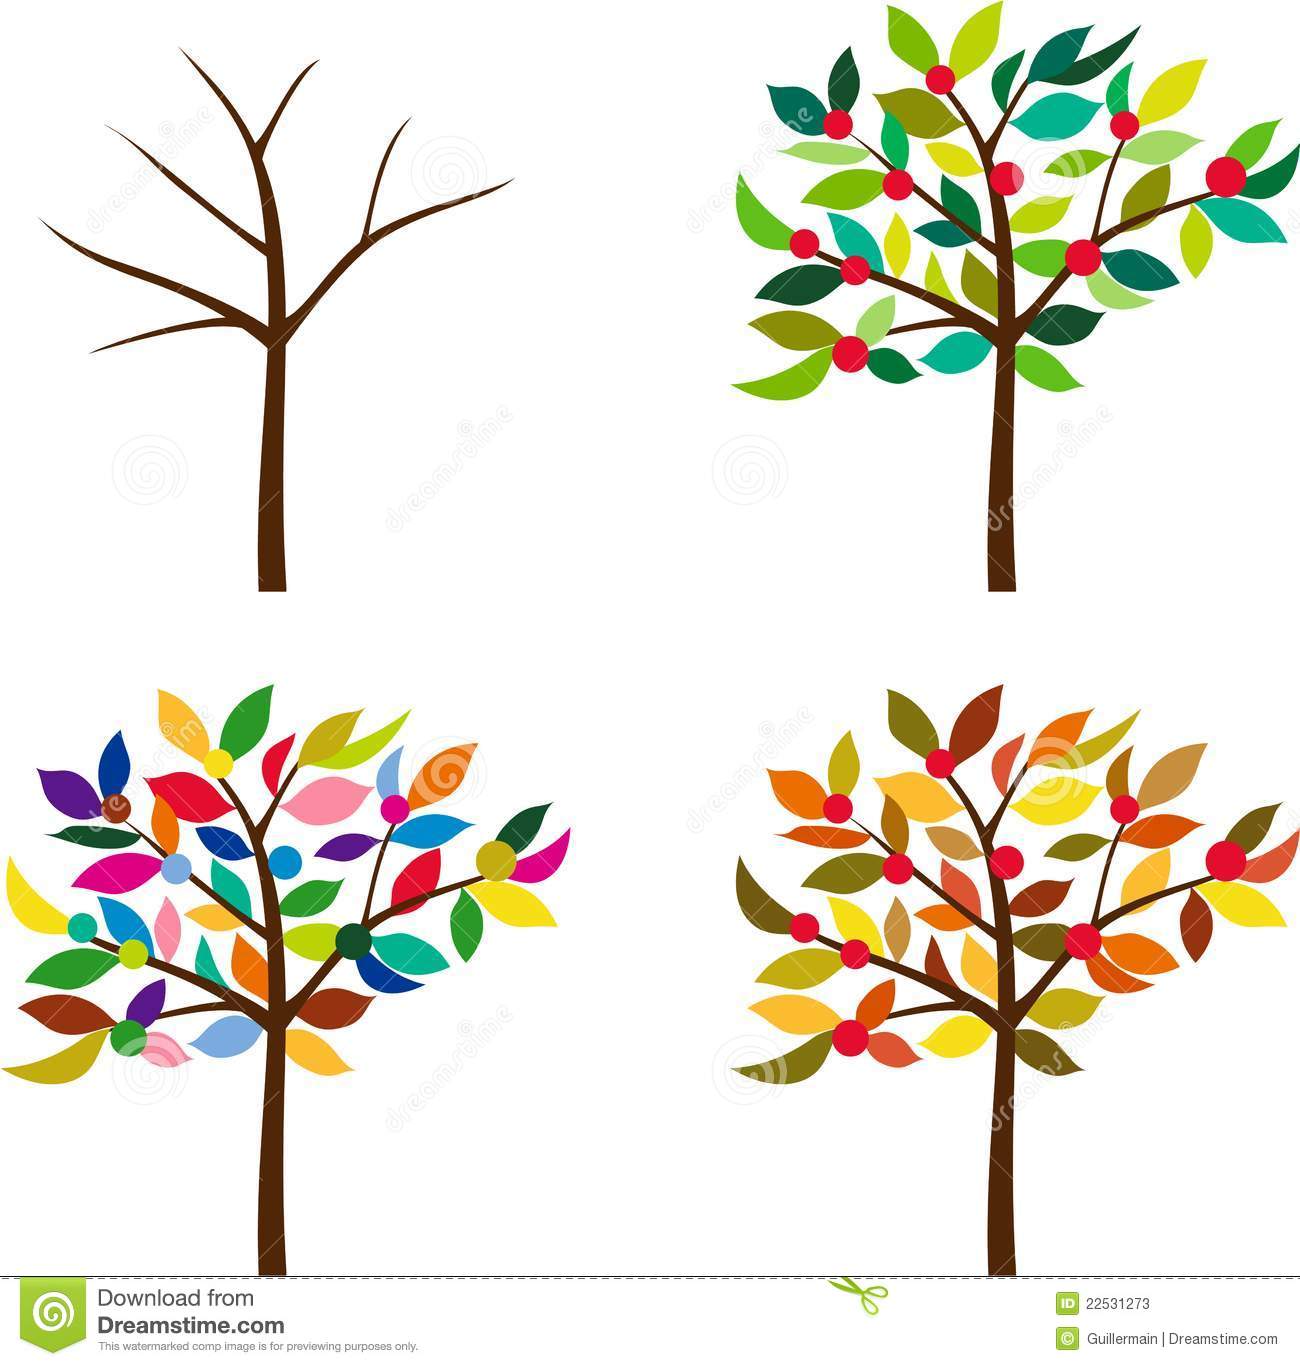 Same Tree In Different Seasons Stock Photos   Image  22531273